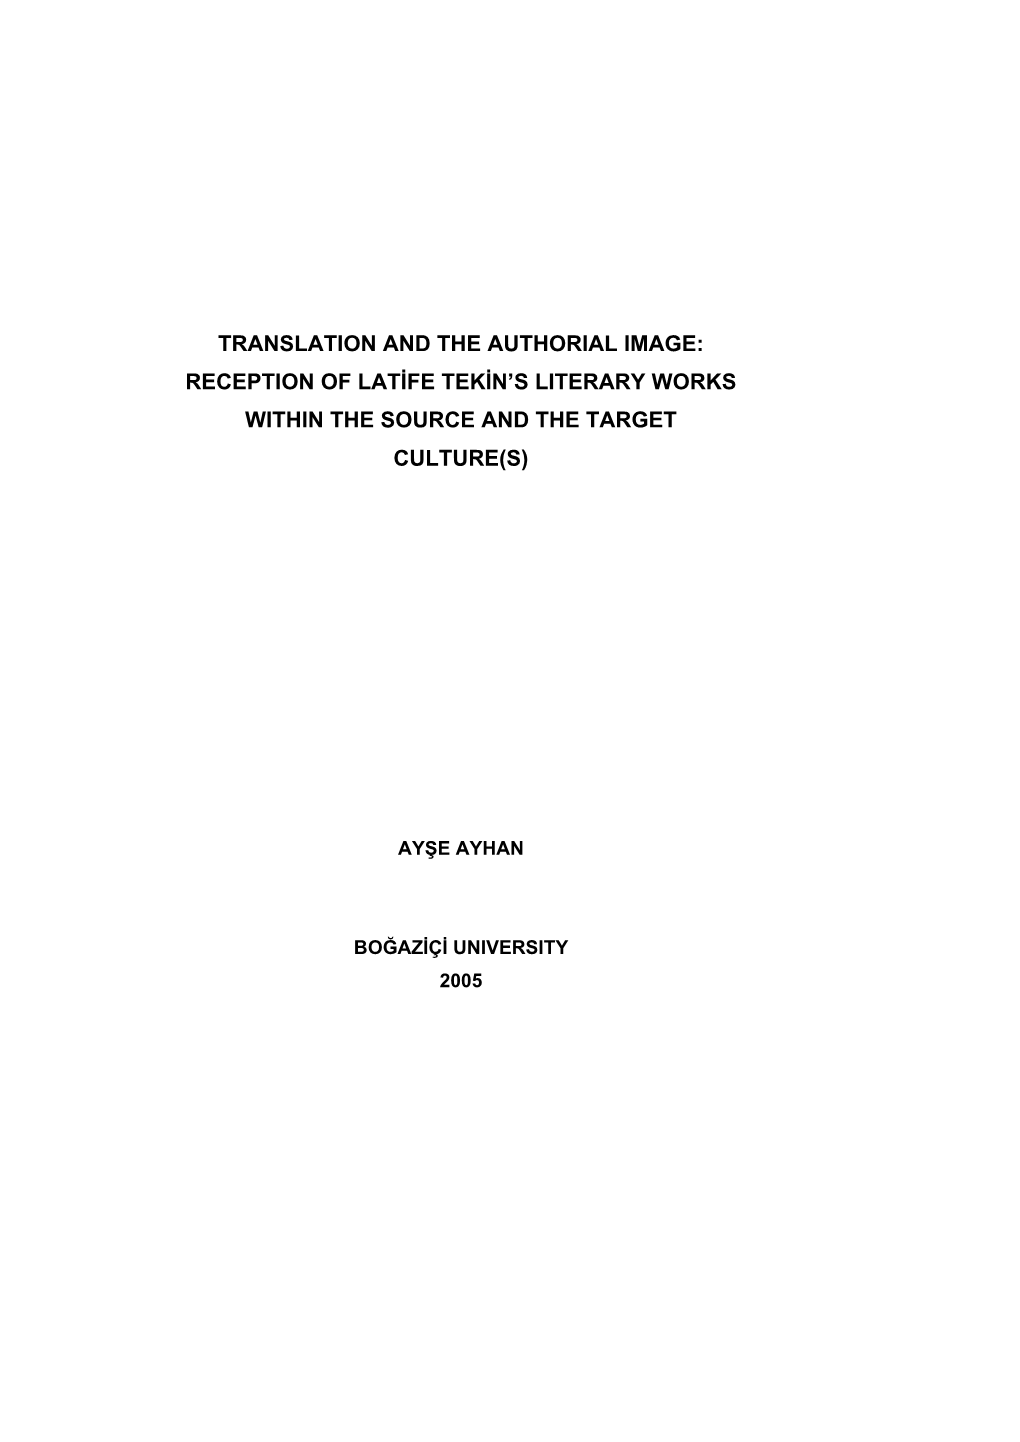 Translation and the Authorial Image: Reception of Latife Tekin's Literary Works Within the Source and the Target Culture(